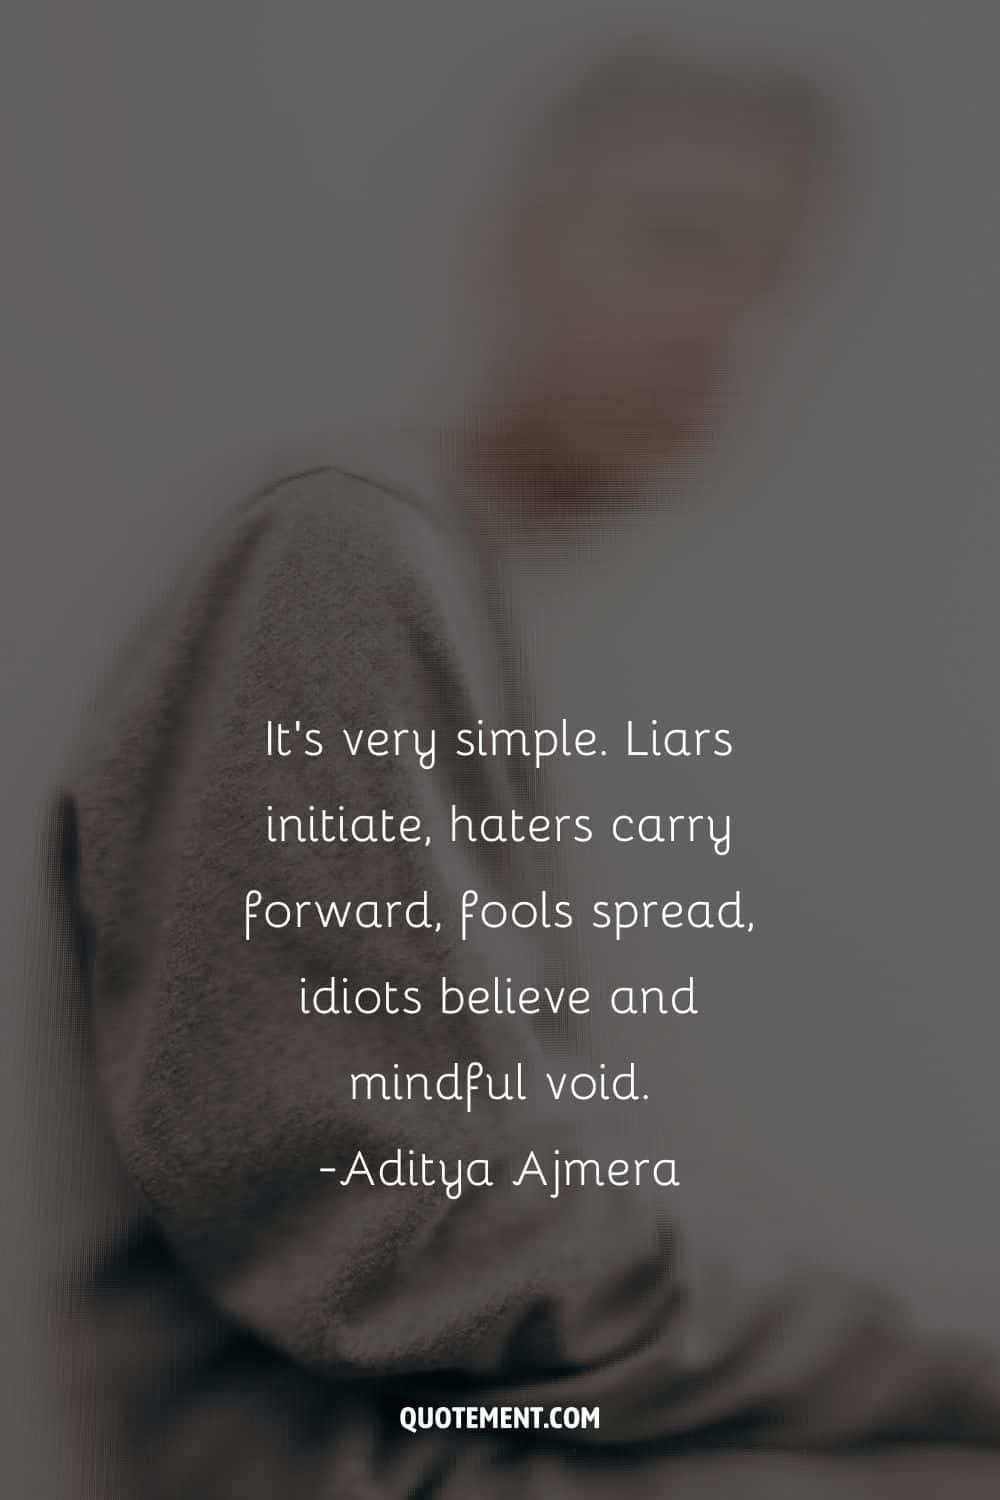 It's very simple. Liars initiate, haters carry forward, fools spread, idiots believe and mindful void.